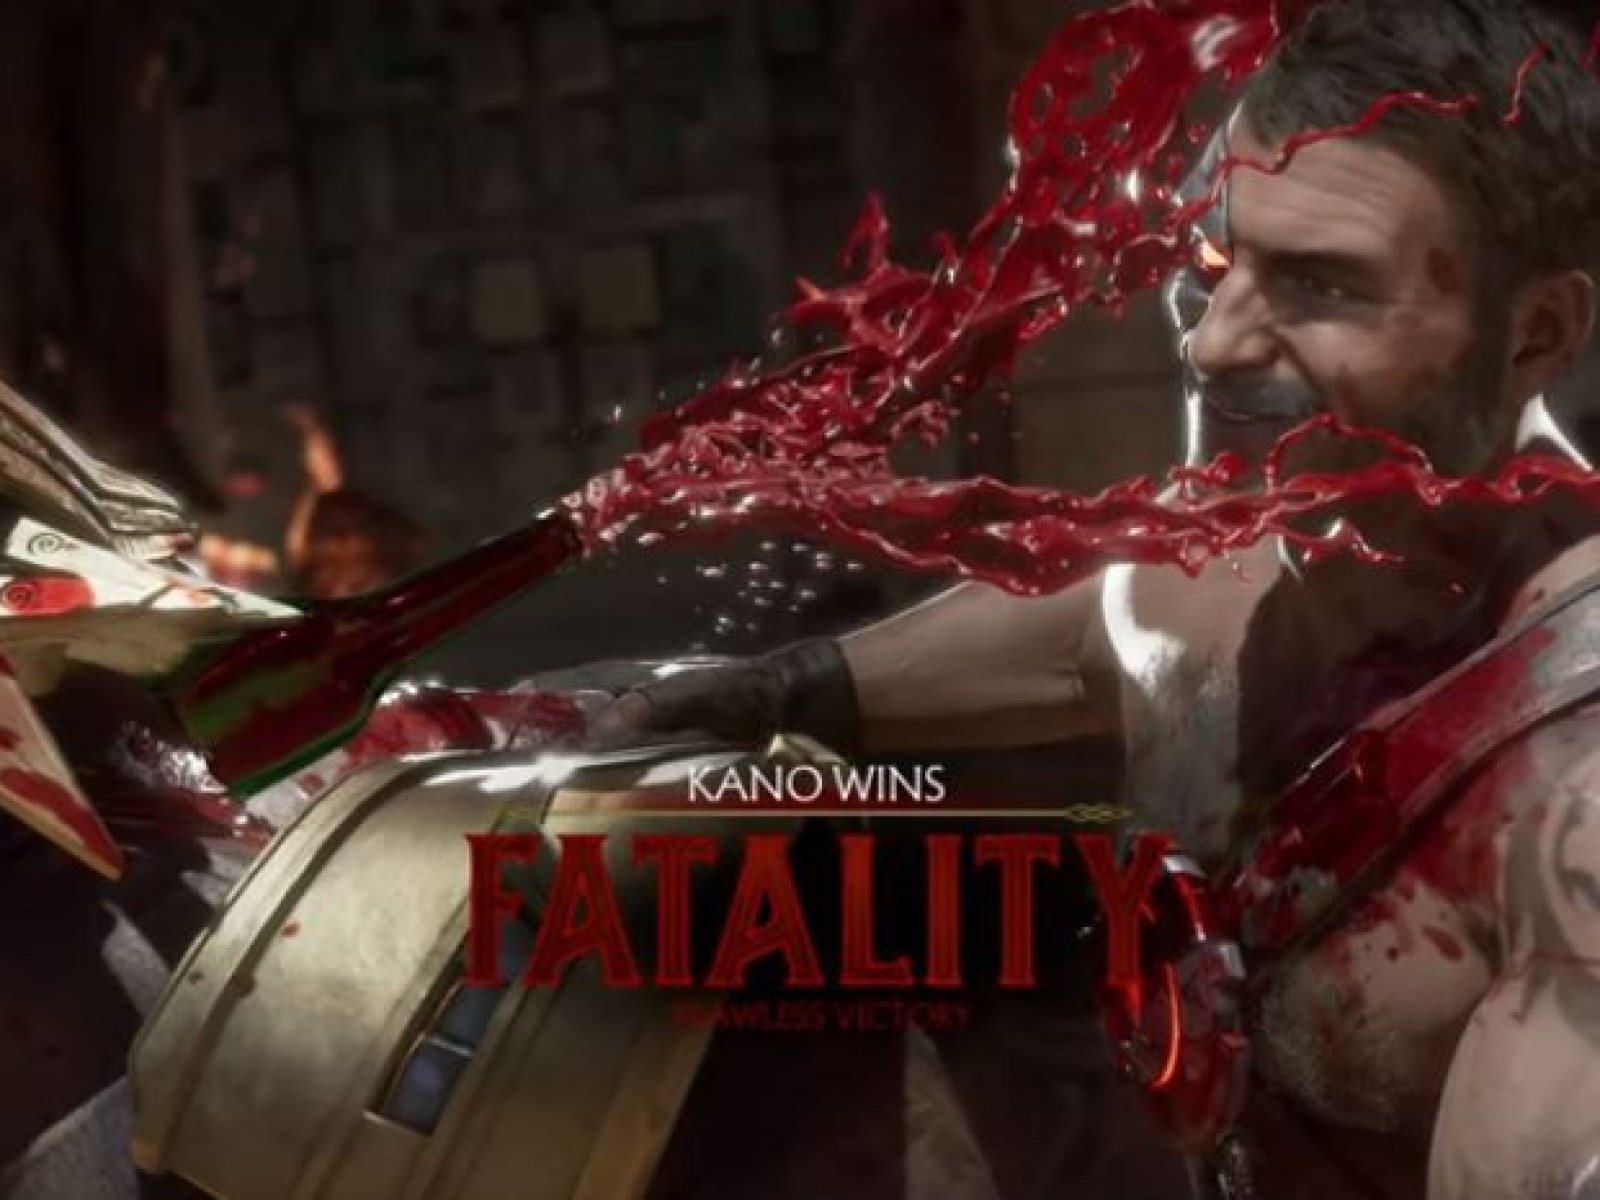 Johnny Cage has the best fatality in Mortal Kombat 11 so far